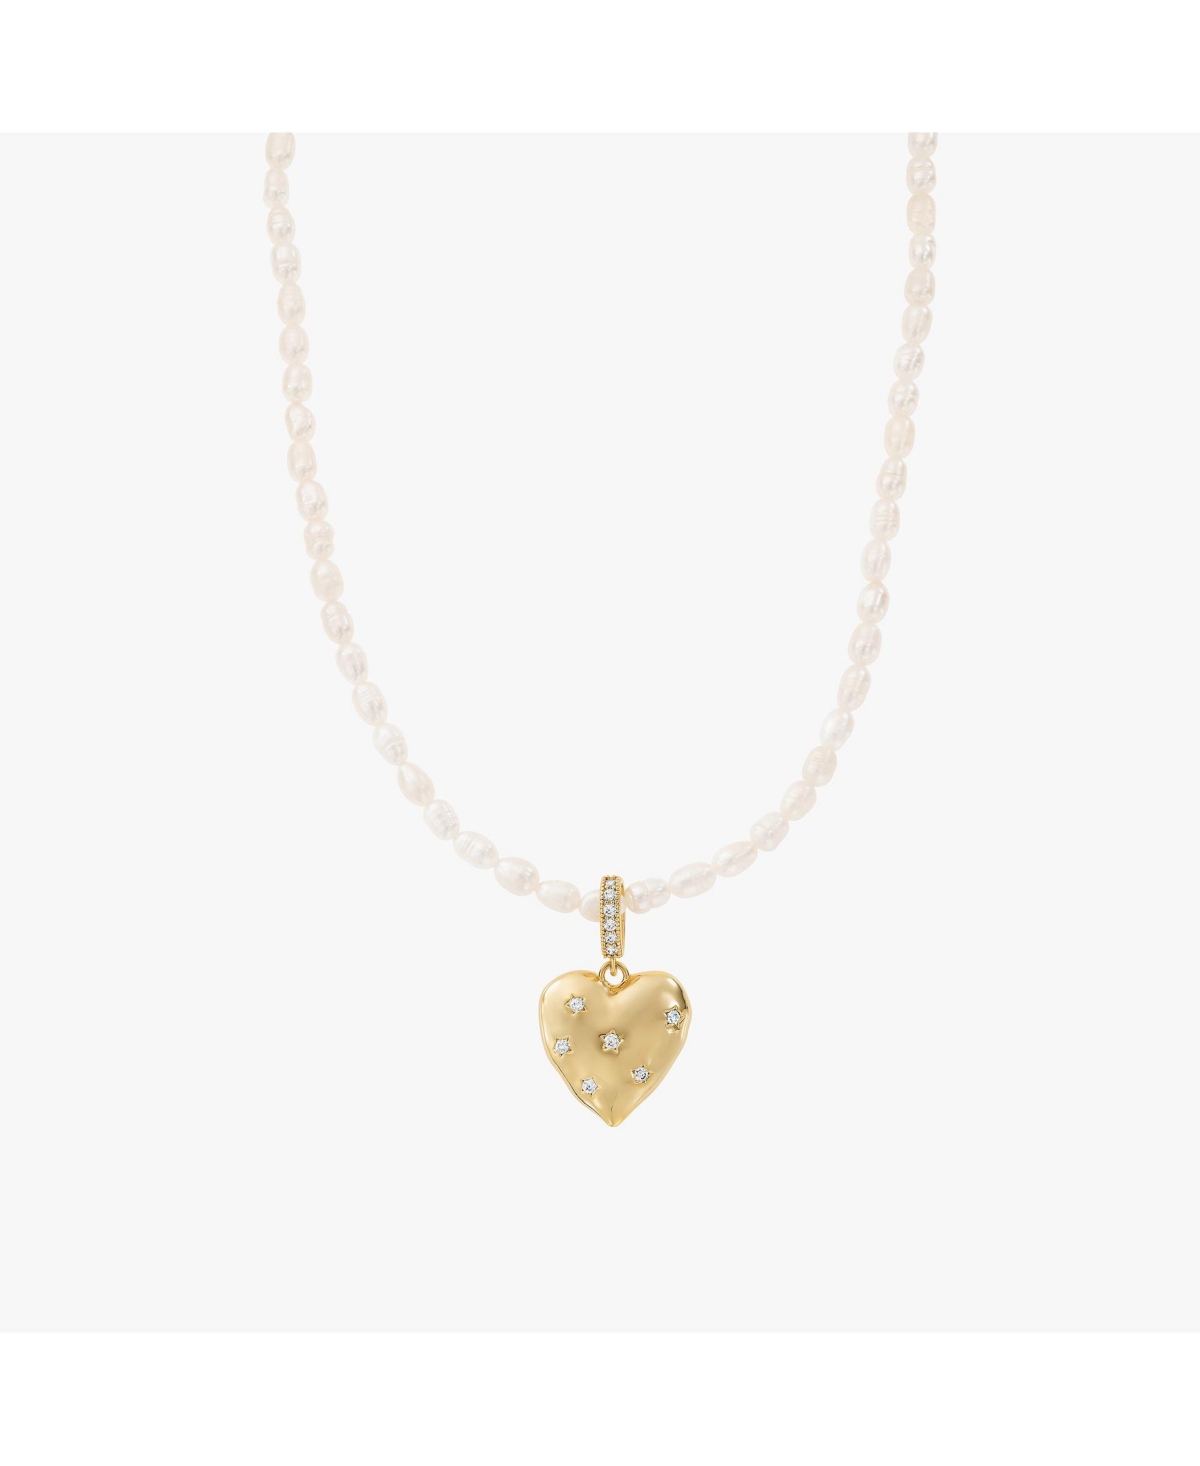 Gleam Cultured Pearl Necklace with Heart Shaped Charm Pendant - White